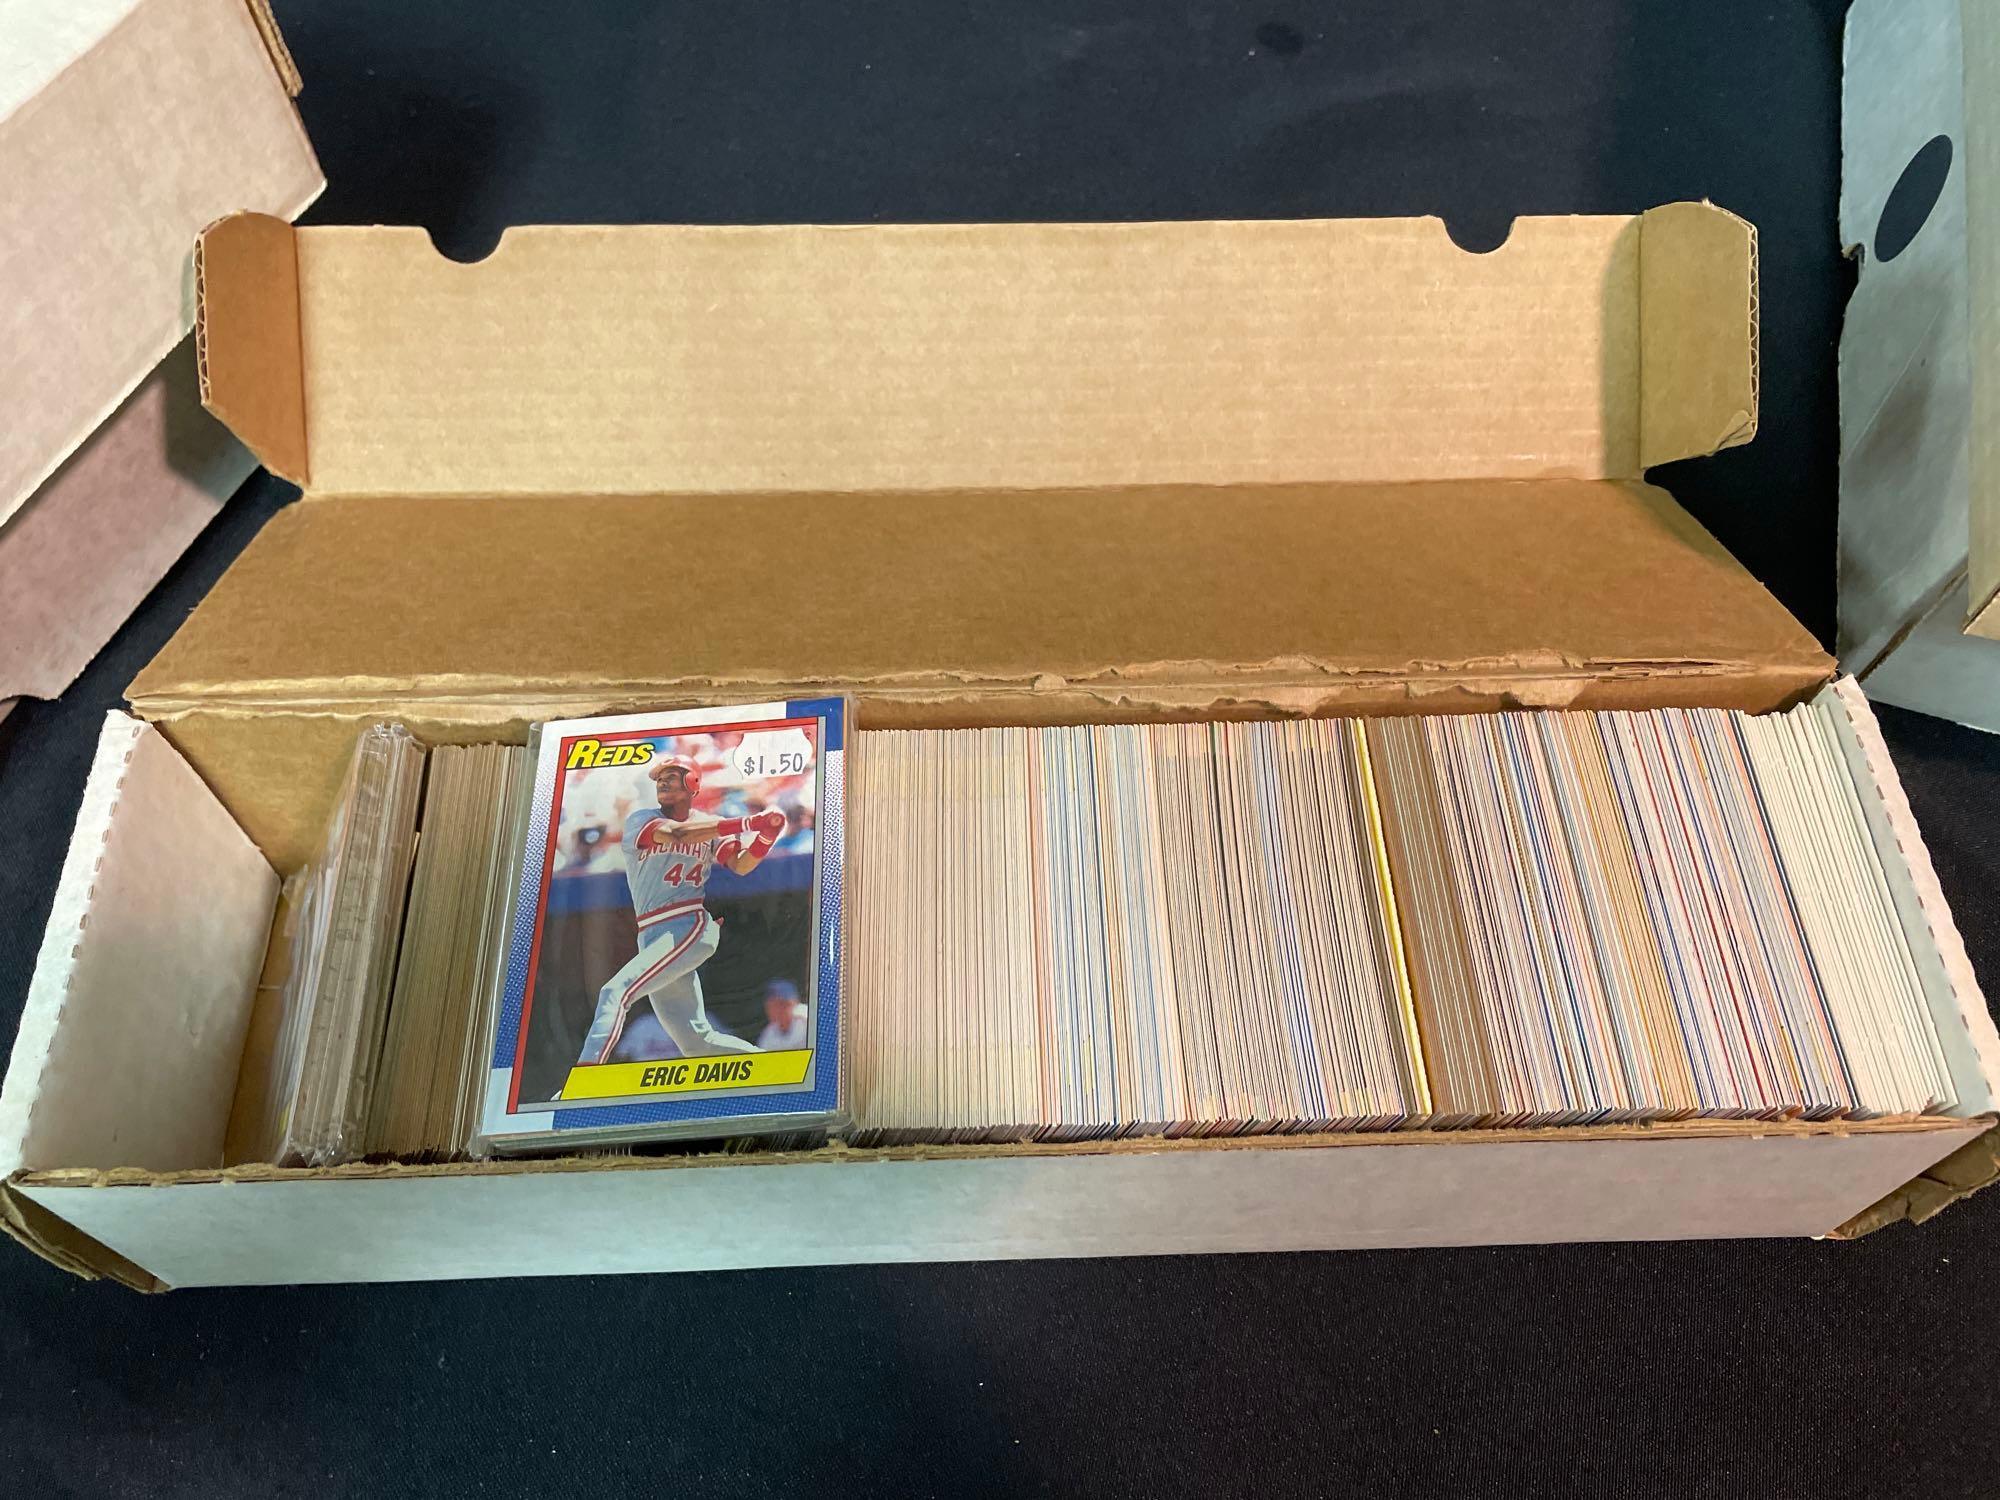 Assorted baseball, with Super Bowl trivia cards, stickers